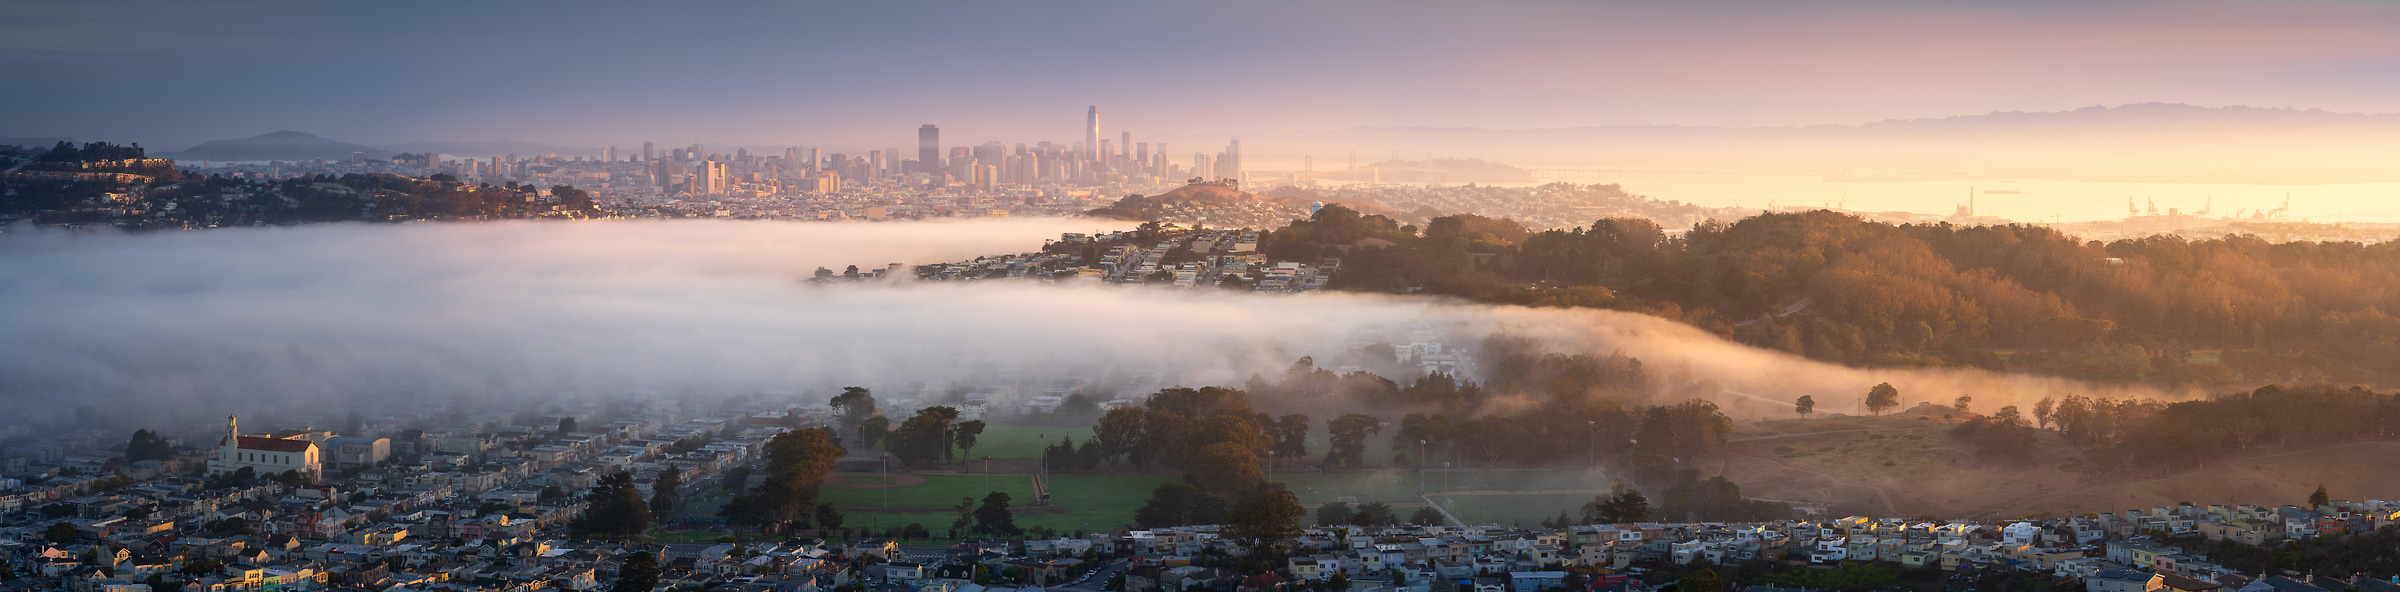 415 megapixels! A very high resolution, large-format VAST photo print of a San Francisco landscape at sunrise; photograph created by Jeff Lewis in San Francisco, California